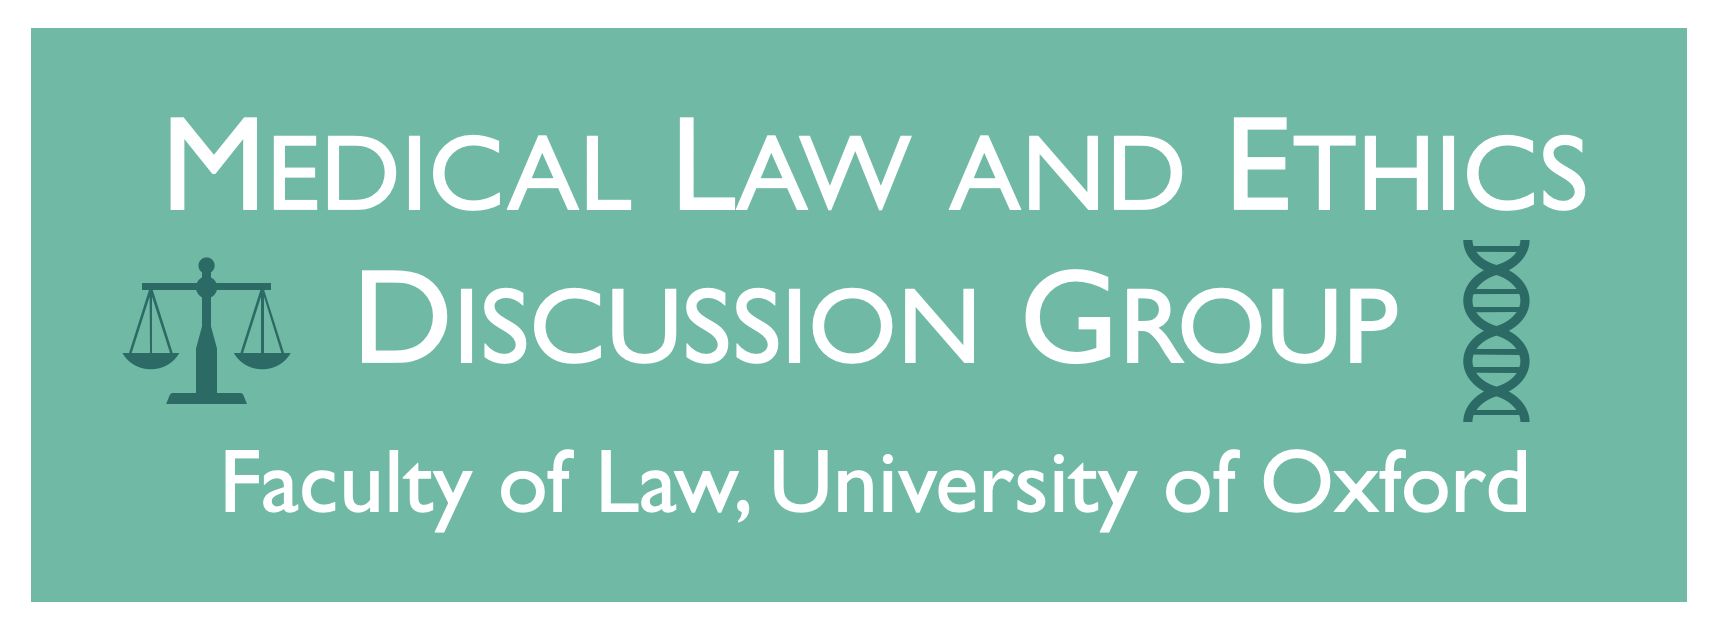 Medical Law and Ethics Discussion Group, Faculty of Law, University of Oxford